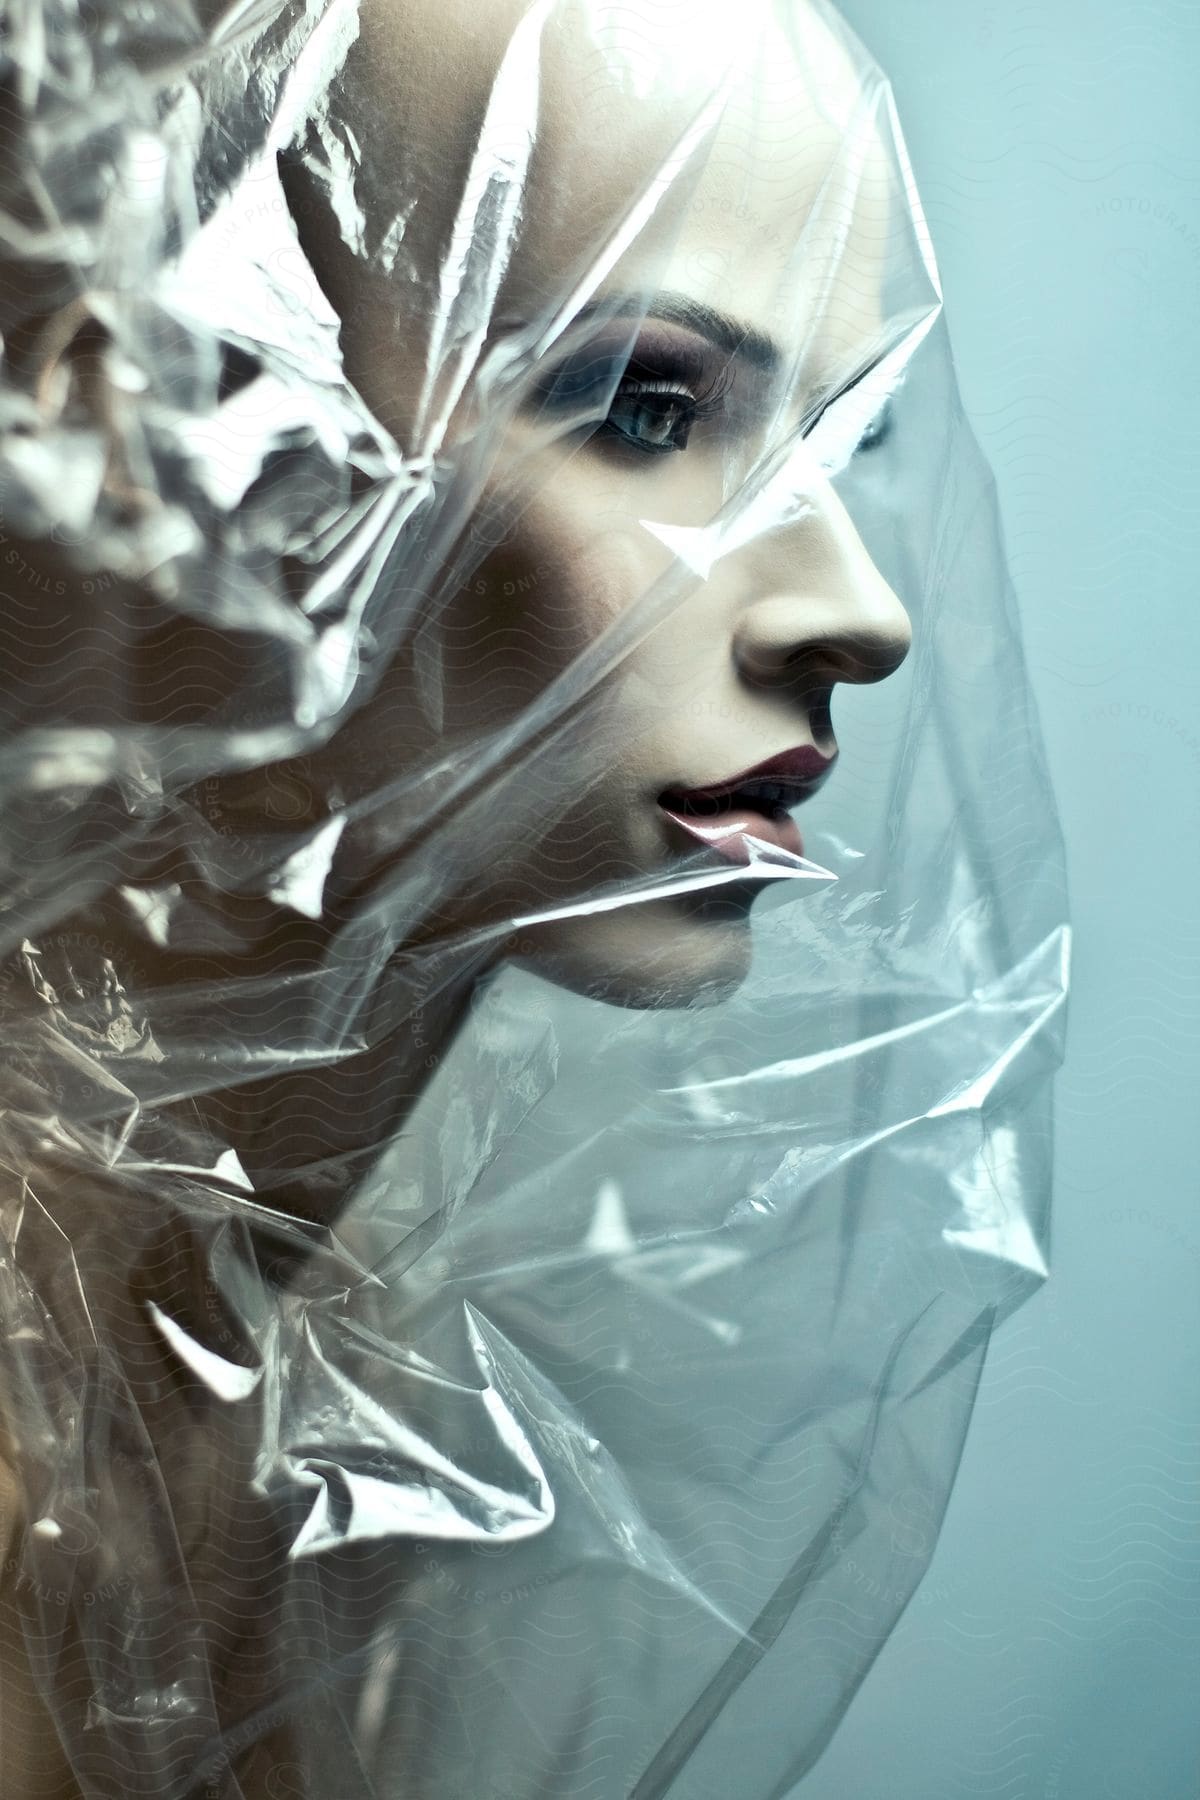 A highly detailed mannequin with a realistic face is covered in a plastic bag